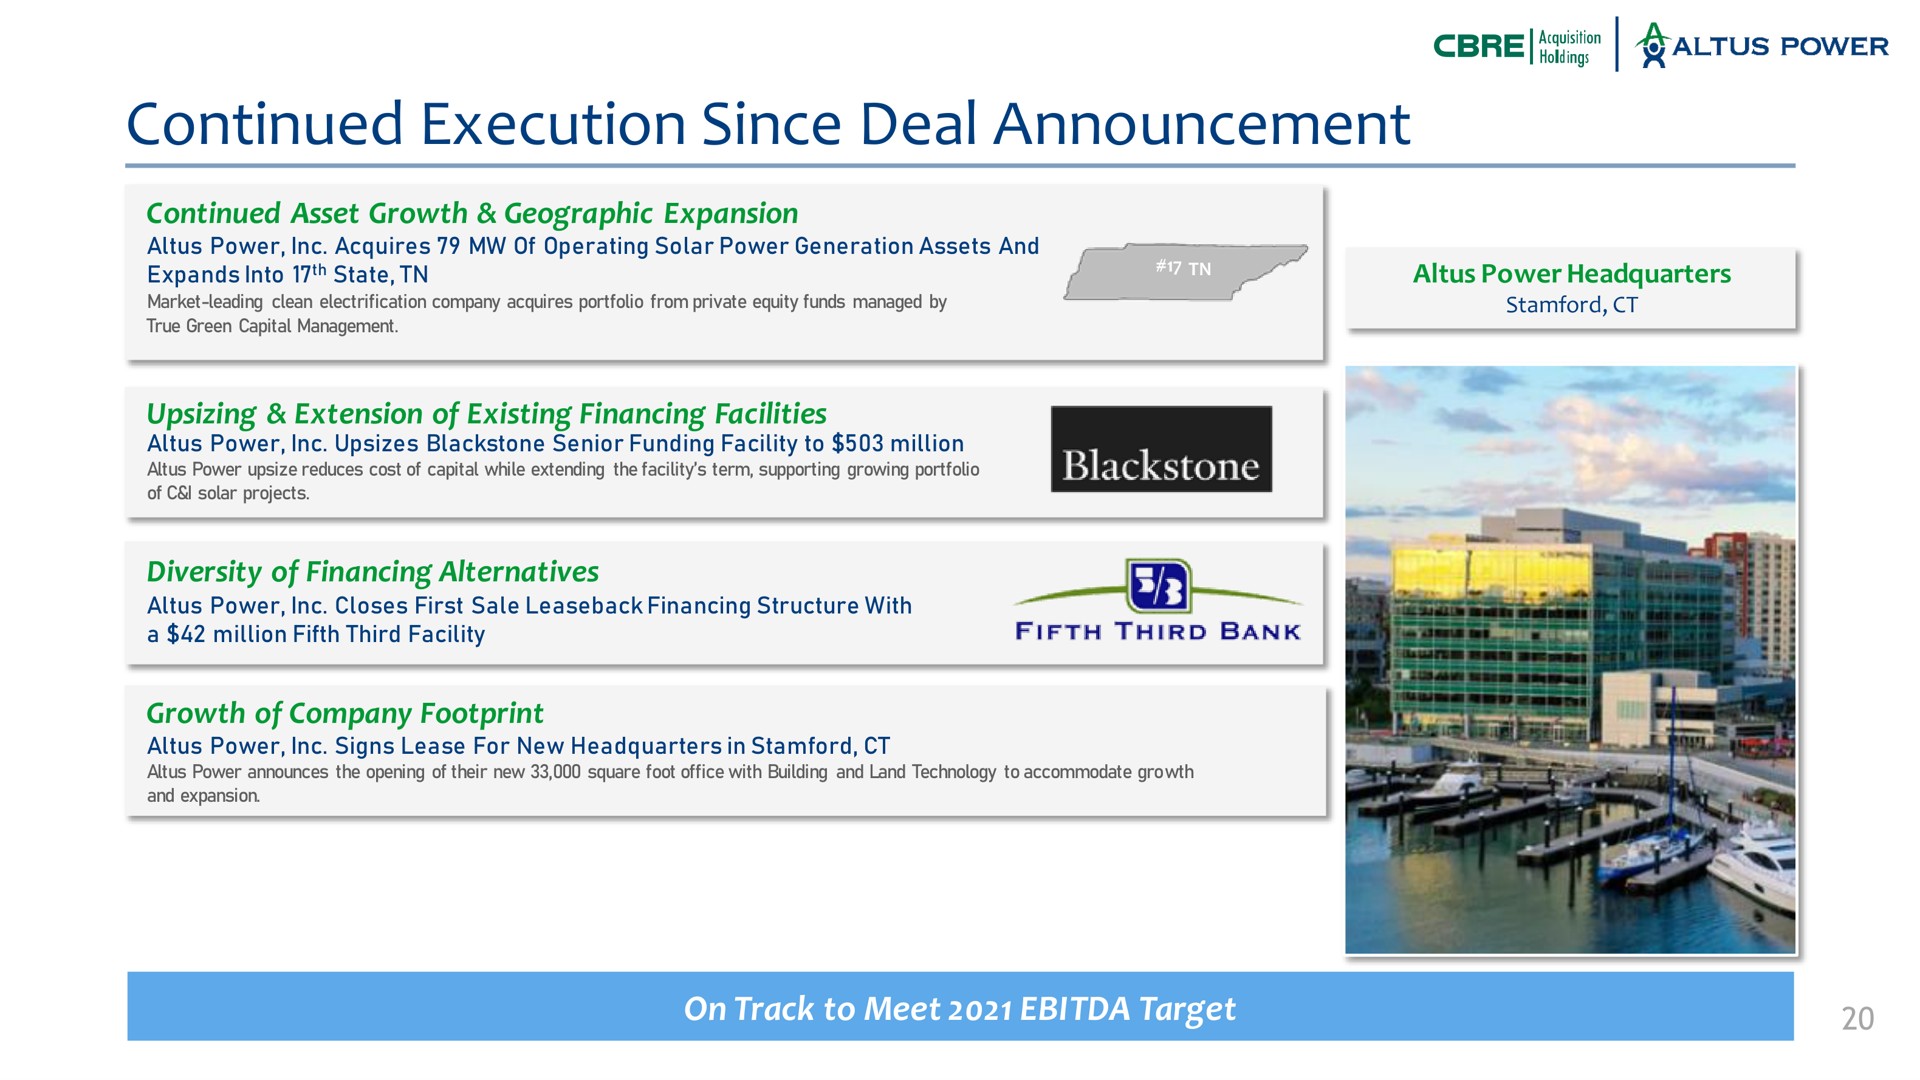 continued execution since deal announcement on track to meet target power extension of existing financing facilities asset growth geographic expansion growth of company footprint diversity of financing alternatives | Altus Power